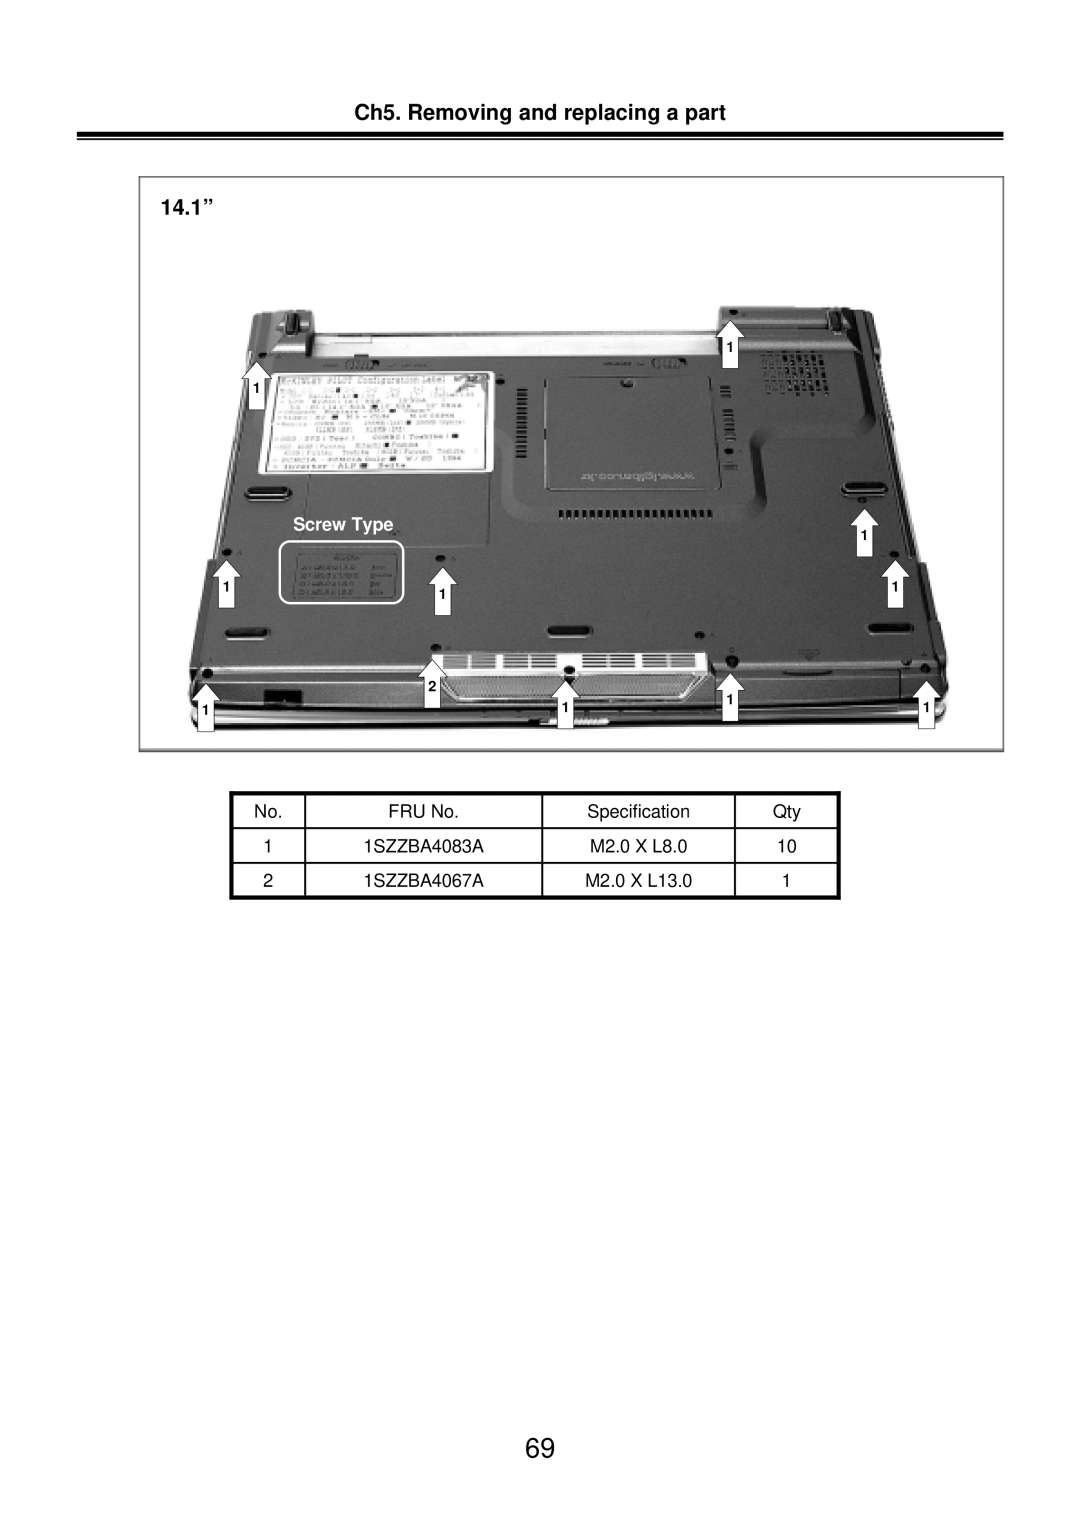 LG Electronics LM50 service manual Ch5. Removing and replacing a part 14.1”, Screw Type 